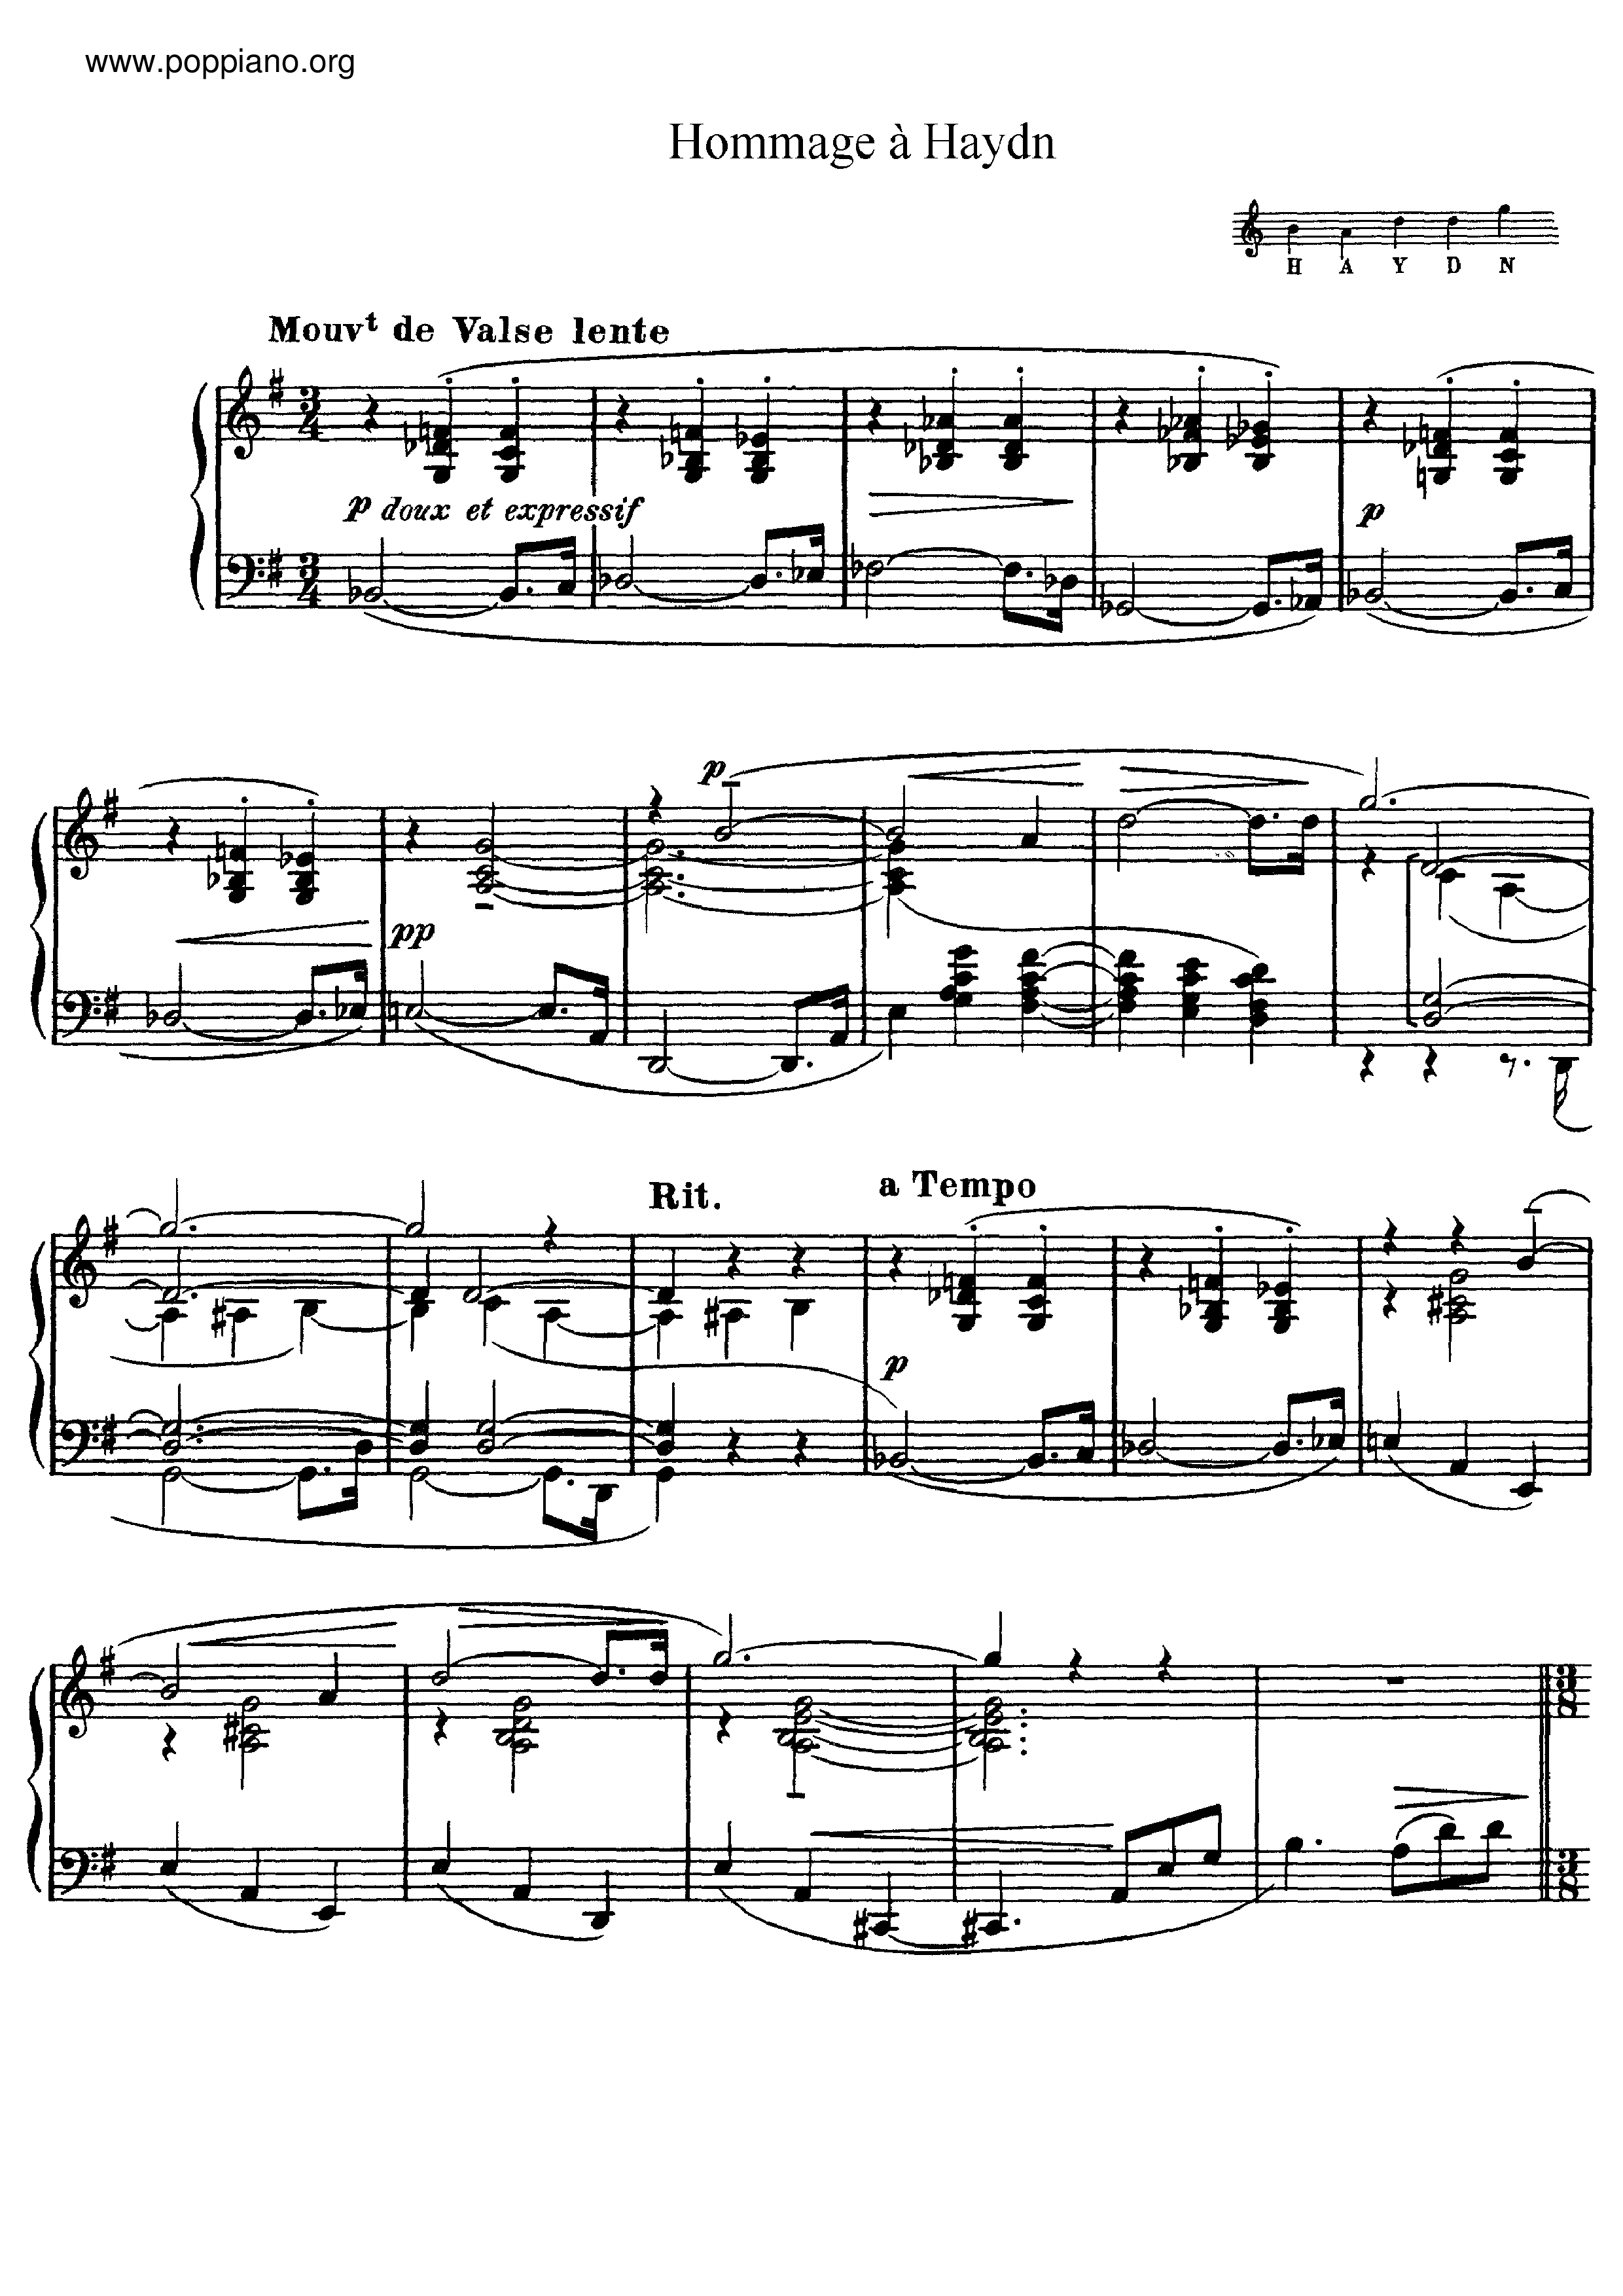 Hommage a Haydn, L. 115 Score